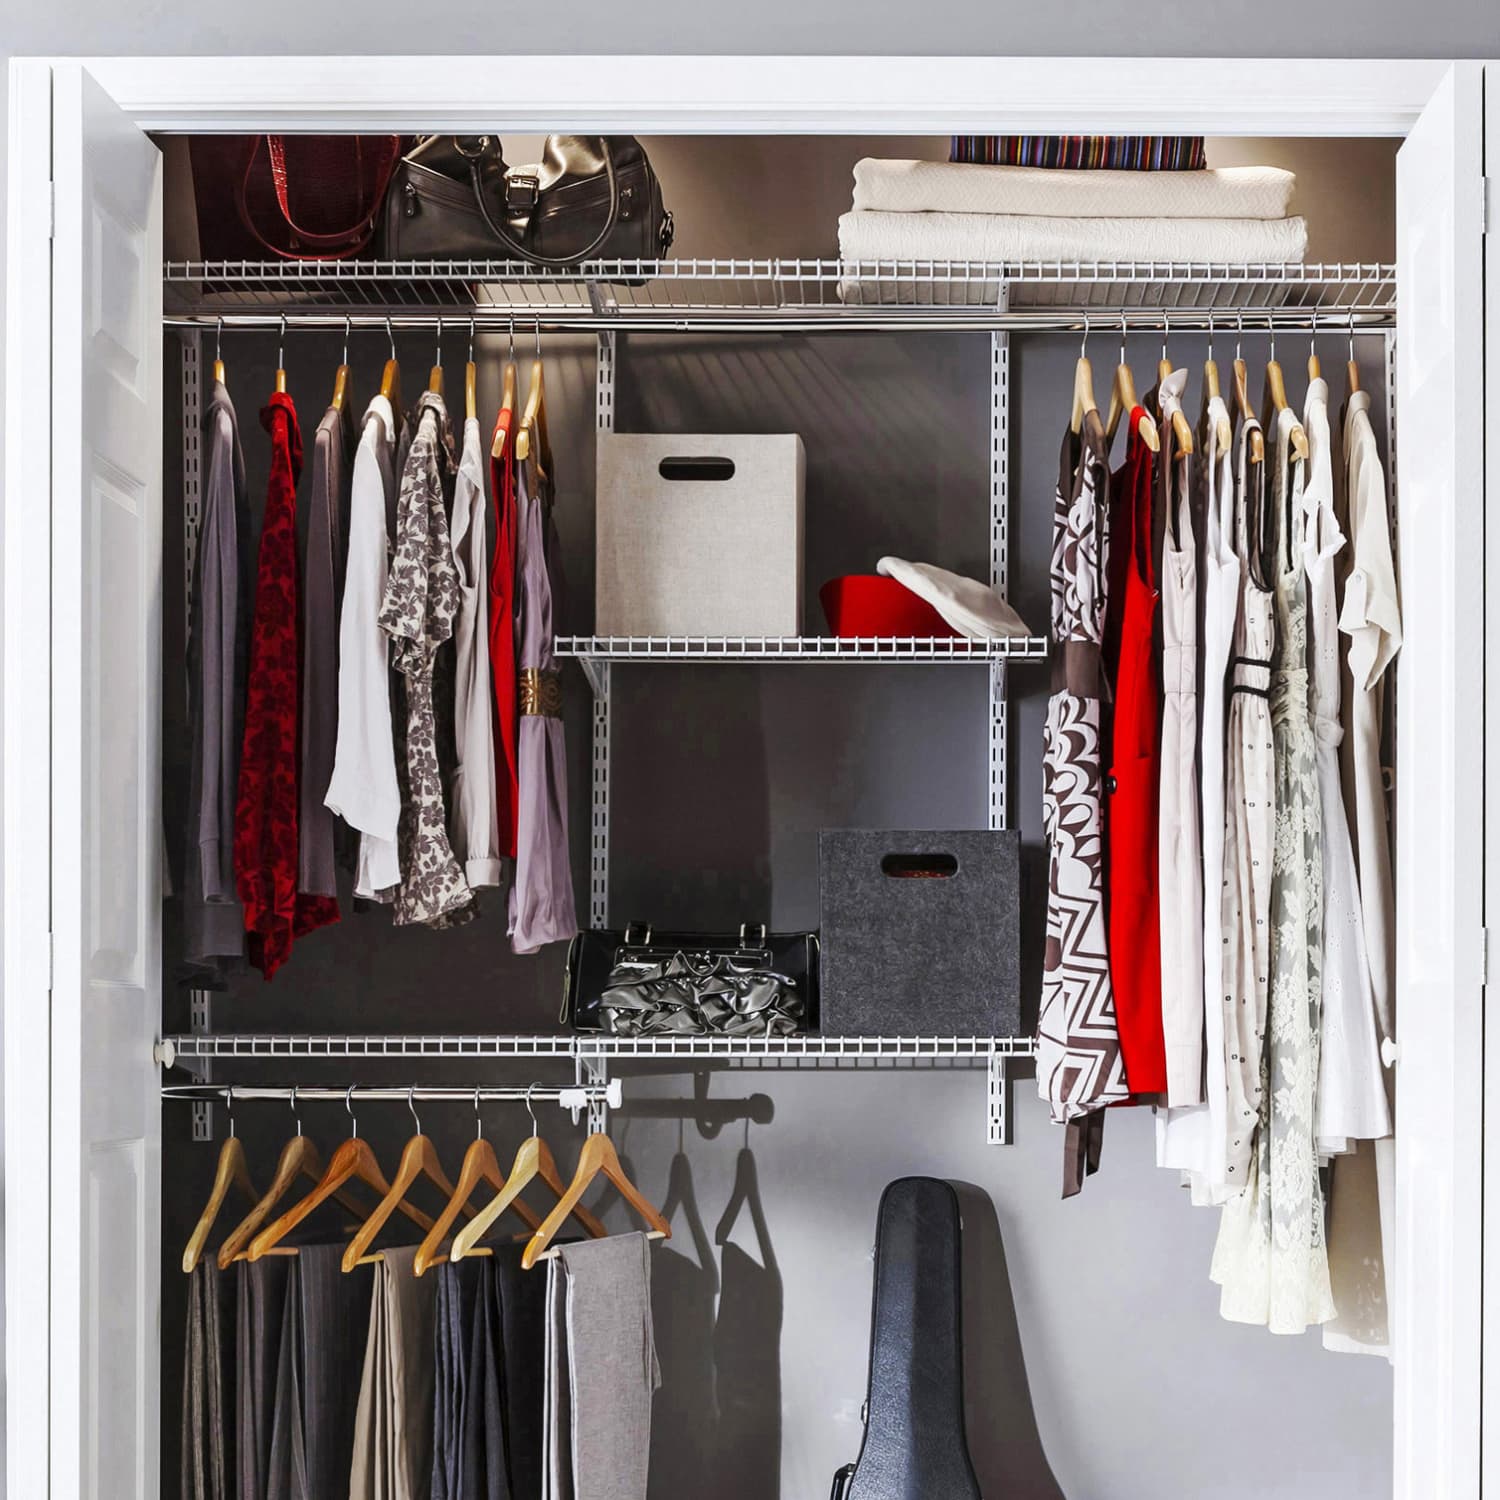 Classic Configurations White Wire Closet Shelf Kit by Rubbermaid